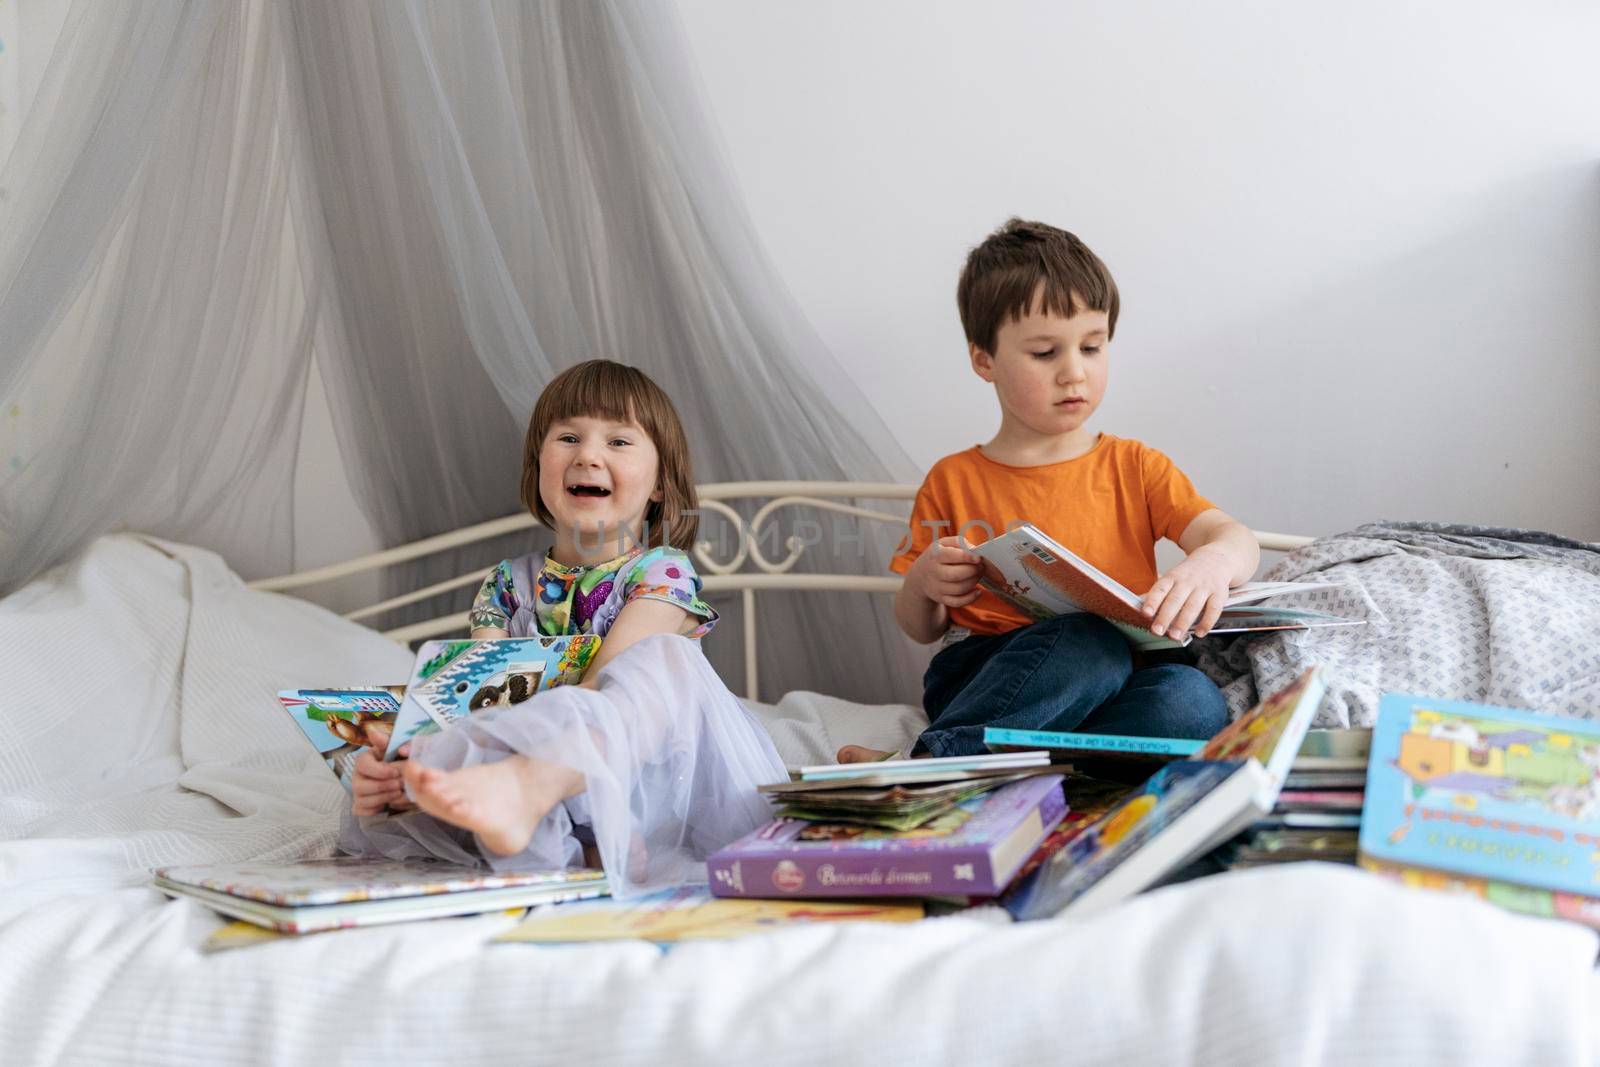 Two siblings reading books together on the sofa bed covered with white blanket in the kids' room, while both of them are smiling